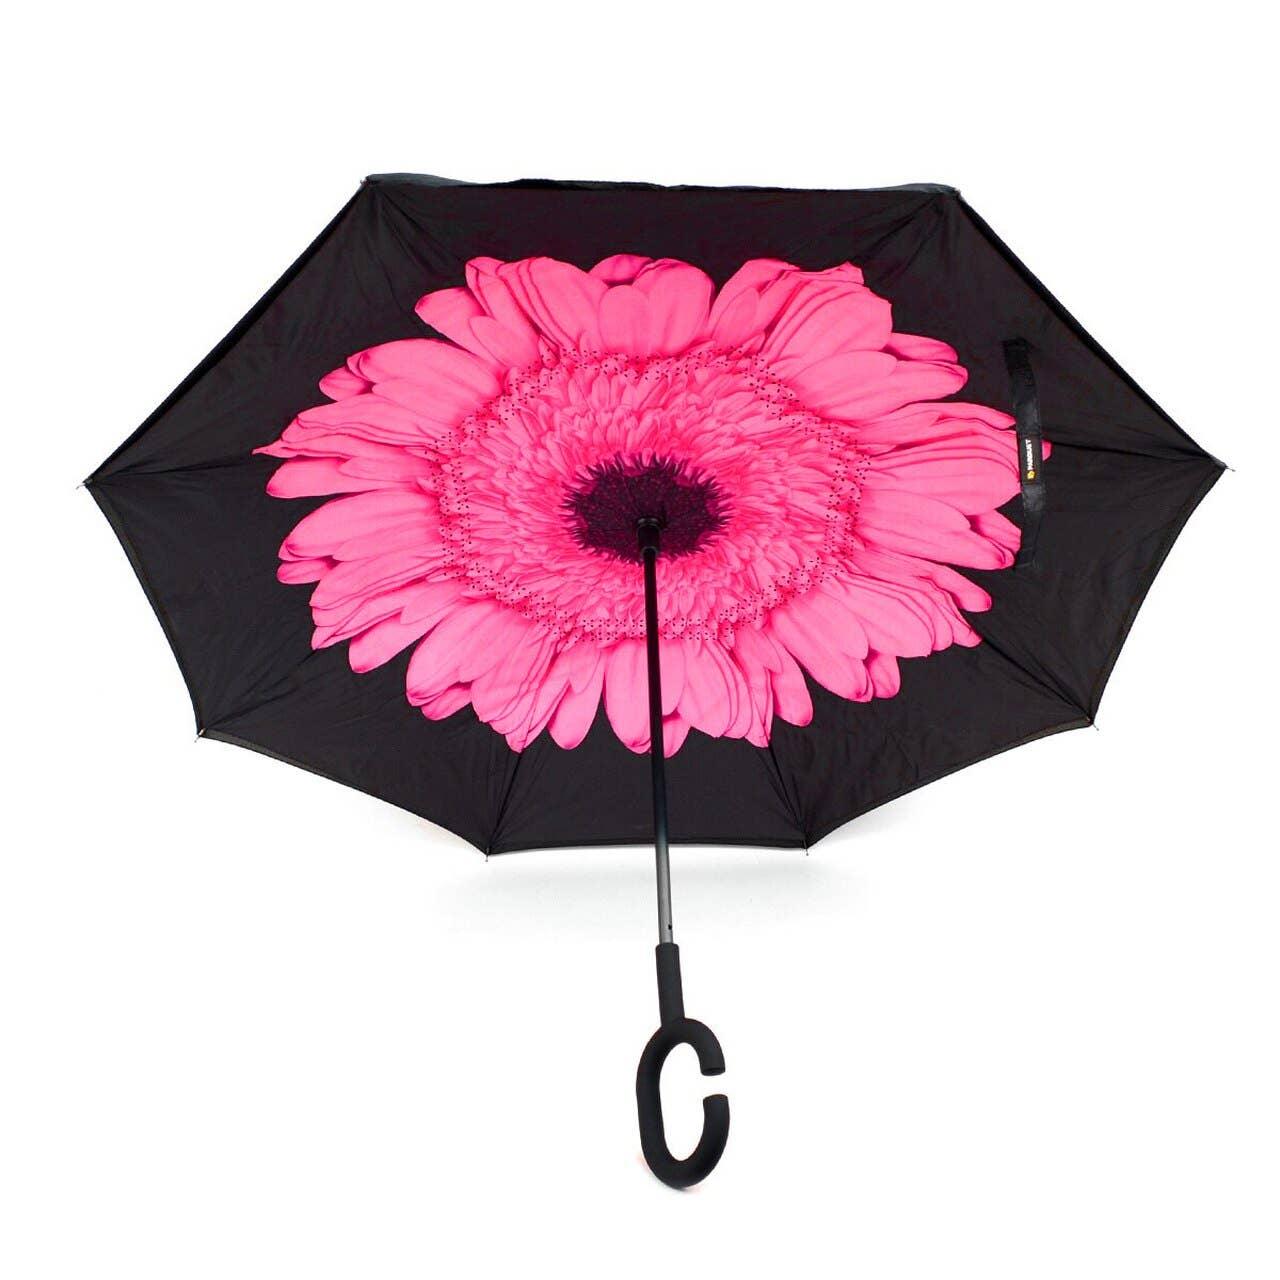 Pink Flower Double Layer Inverted Umbrella - Village Floral Designs and Gifts